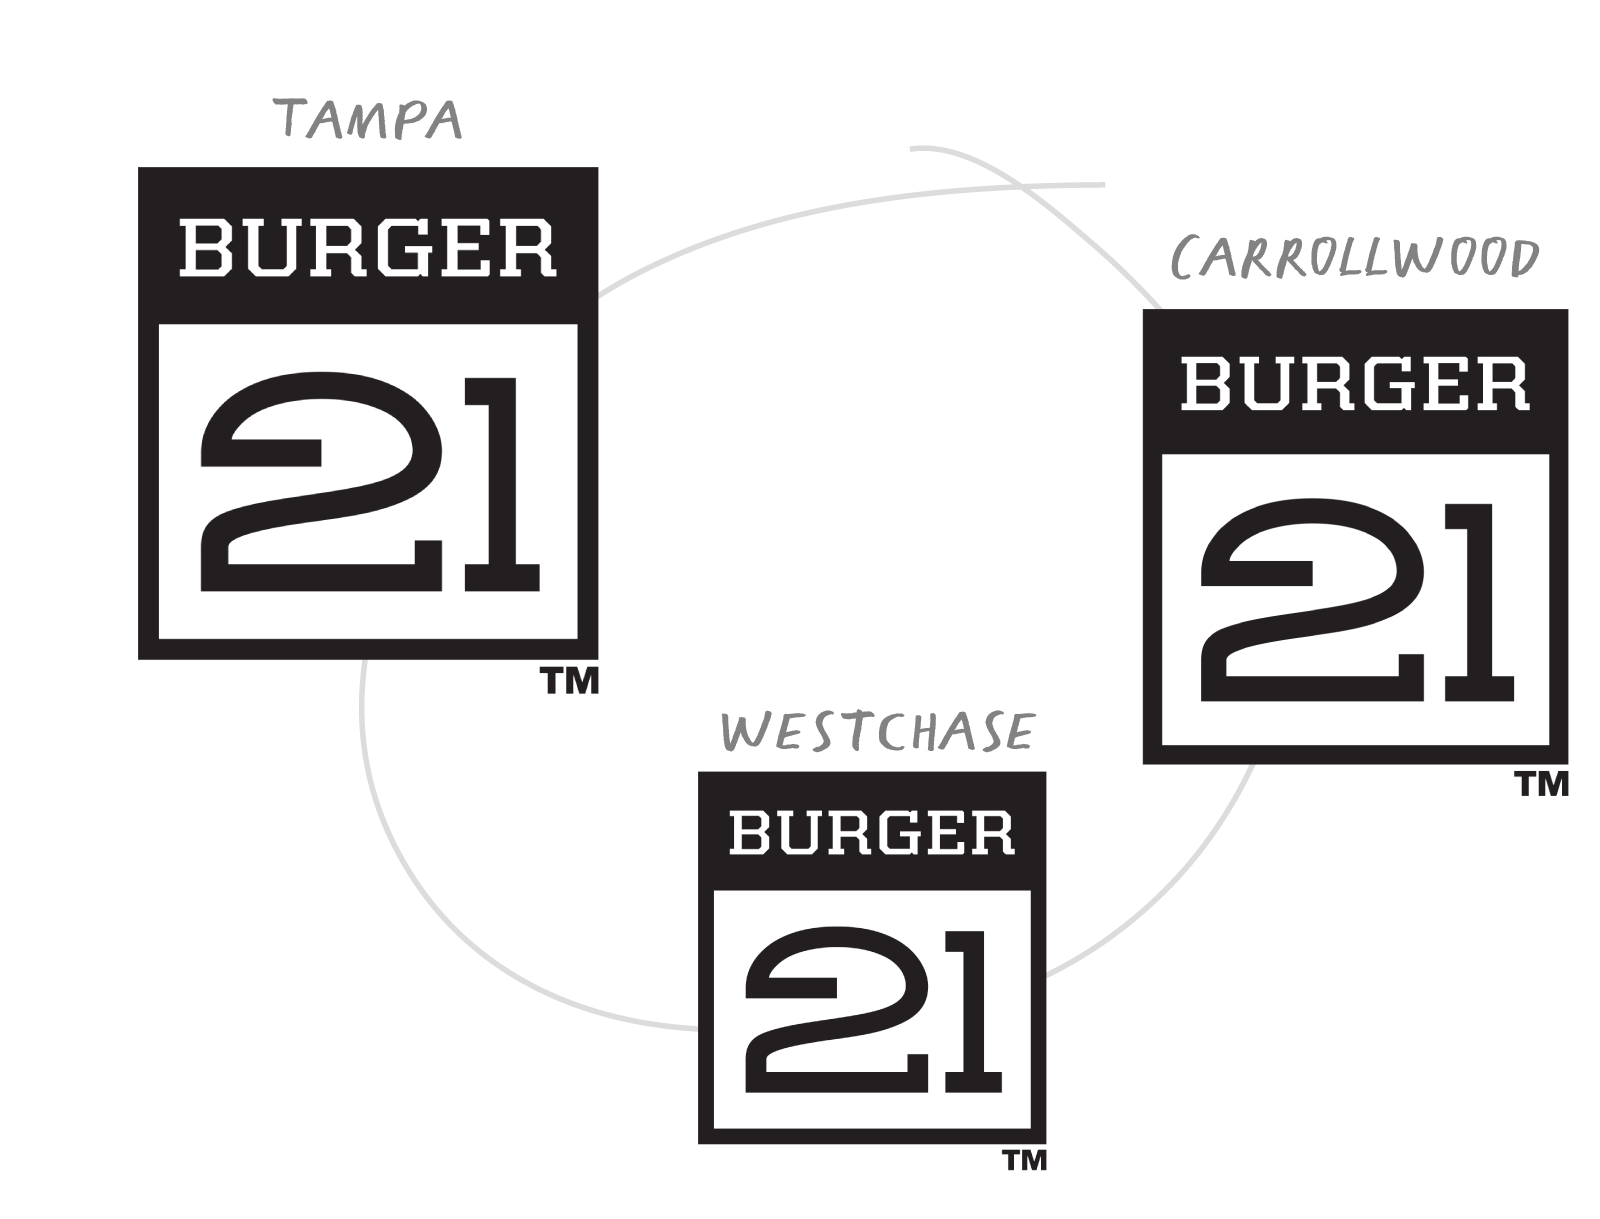 Burger21 in Tampa, Carrollwood, and Westchase Florida